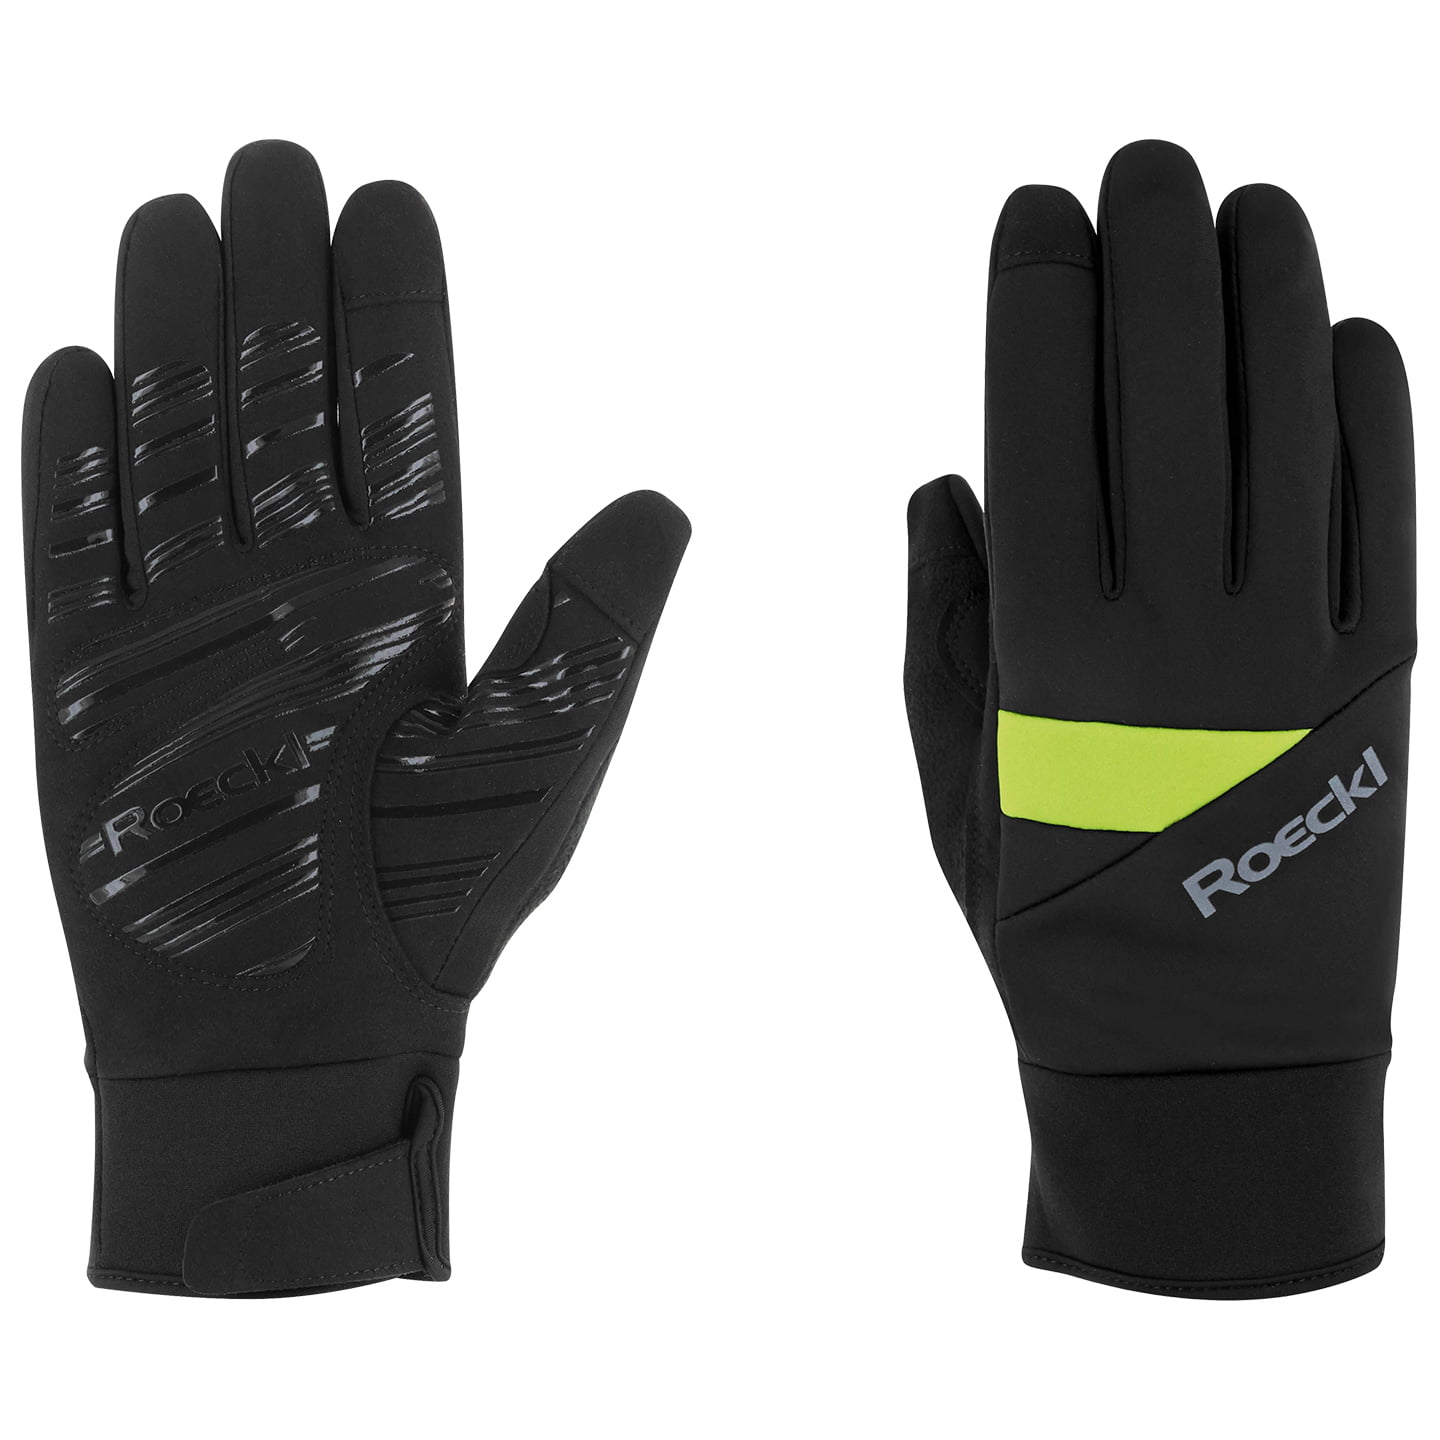 ROECKL Reichenthal Winter Gloves Winter Cycling Gloves, for men, size 8,5, MTB gloves, Cycling apparel